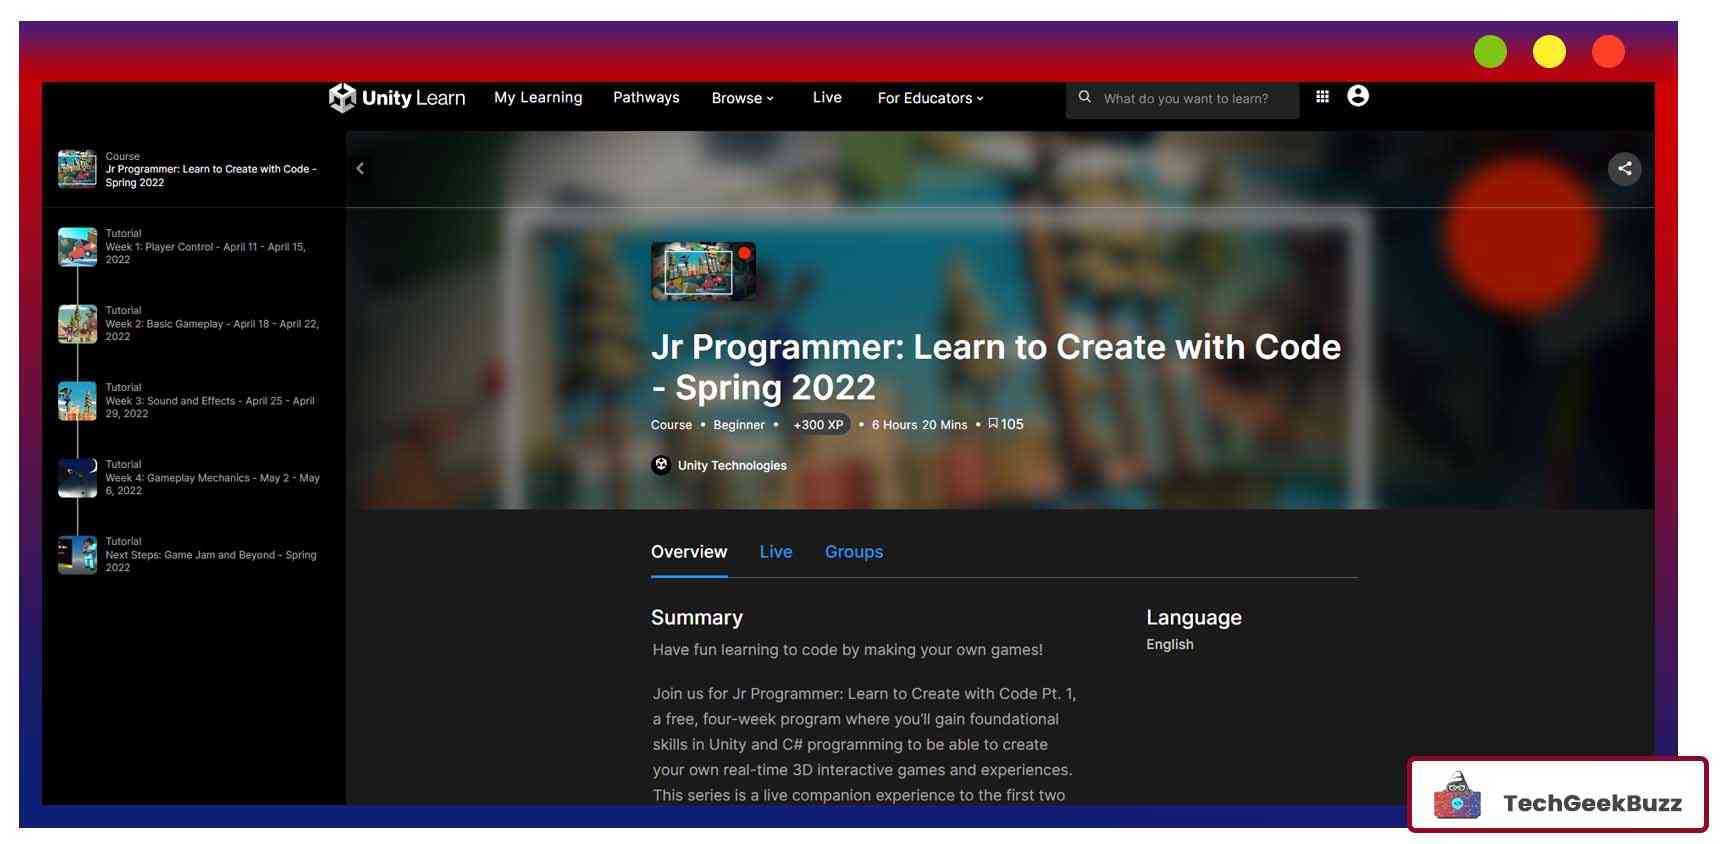 Jr Programmer: Learn to Create with Code Pt. 1- Spring 2022